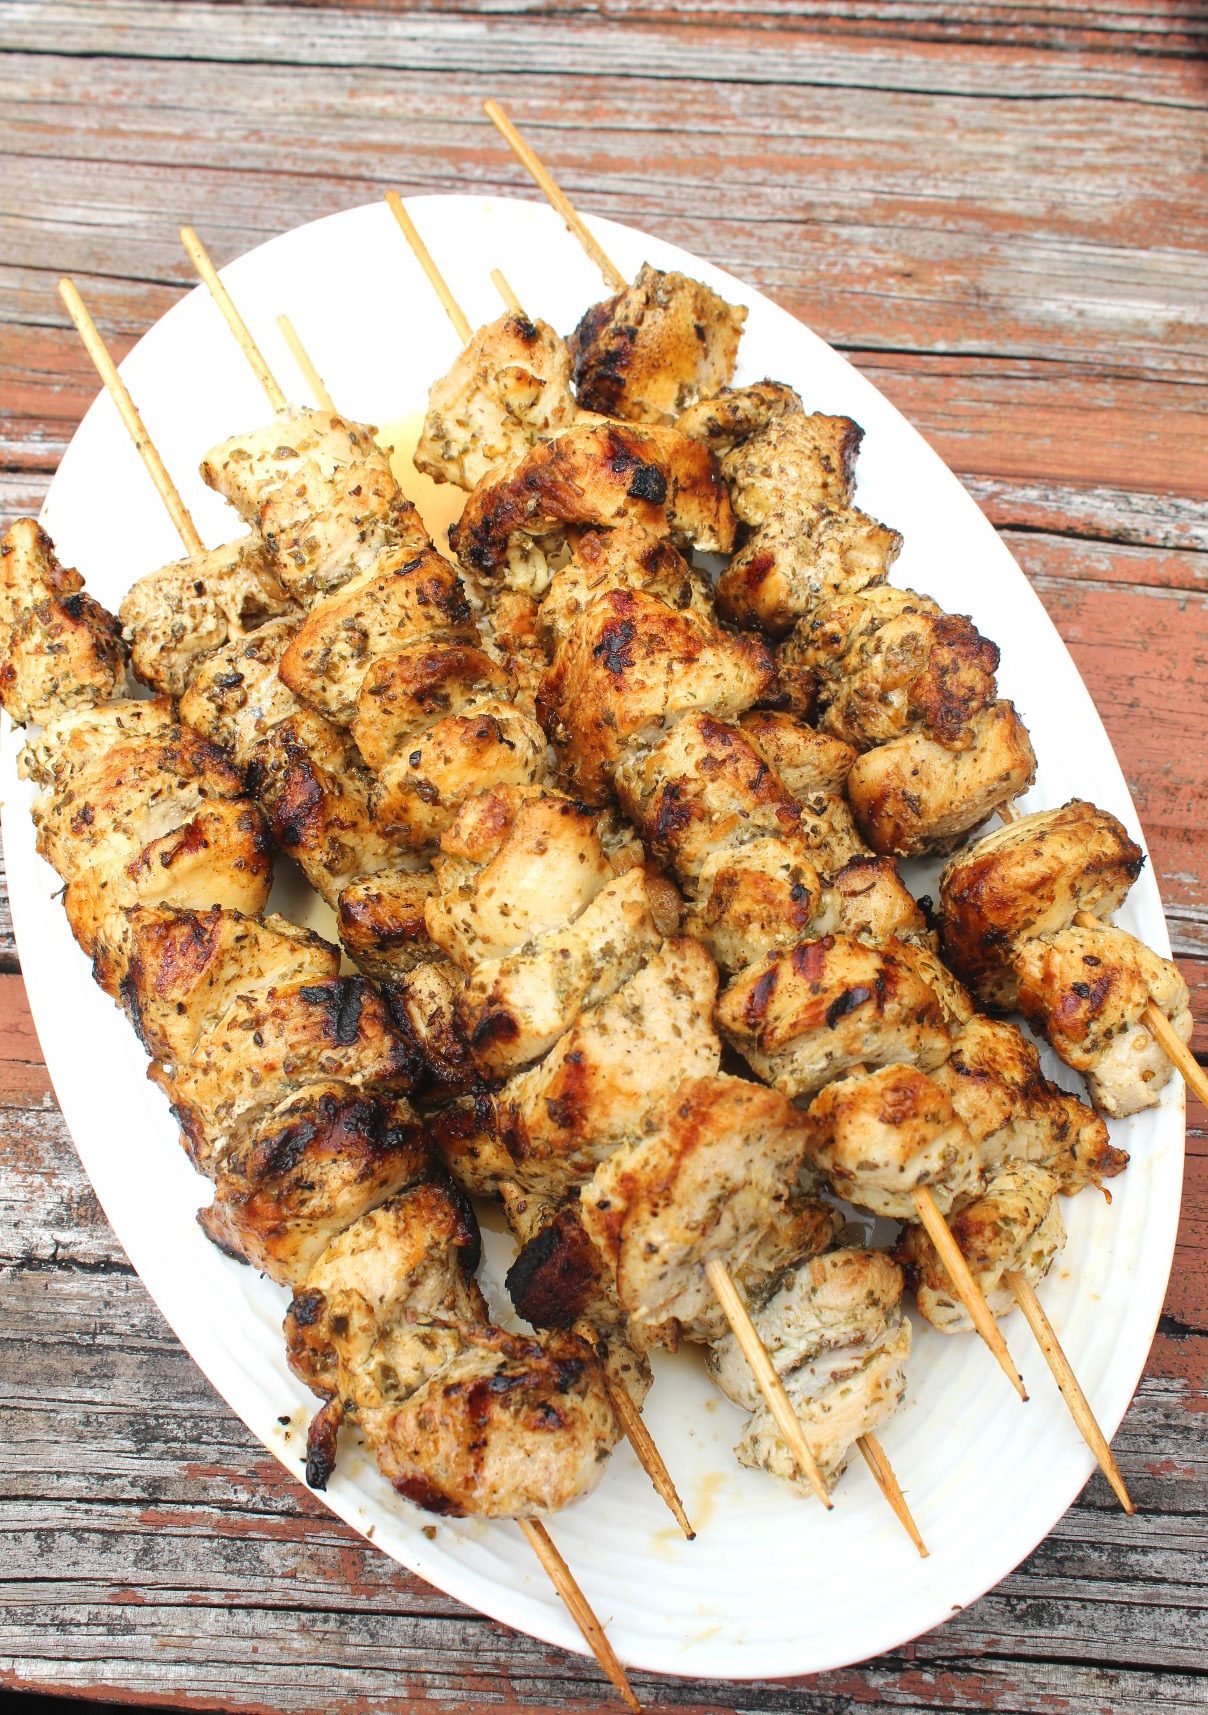 A platter full of chicken kabobs in skewers, already grilled.